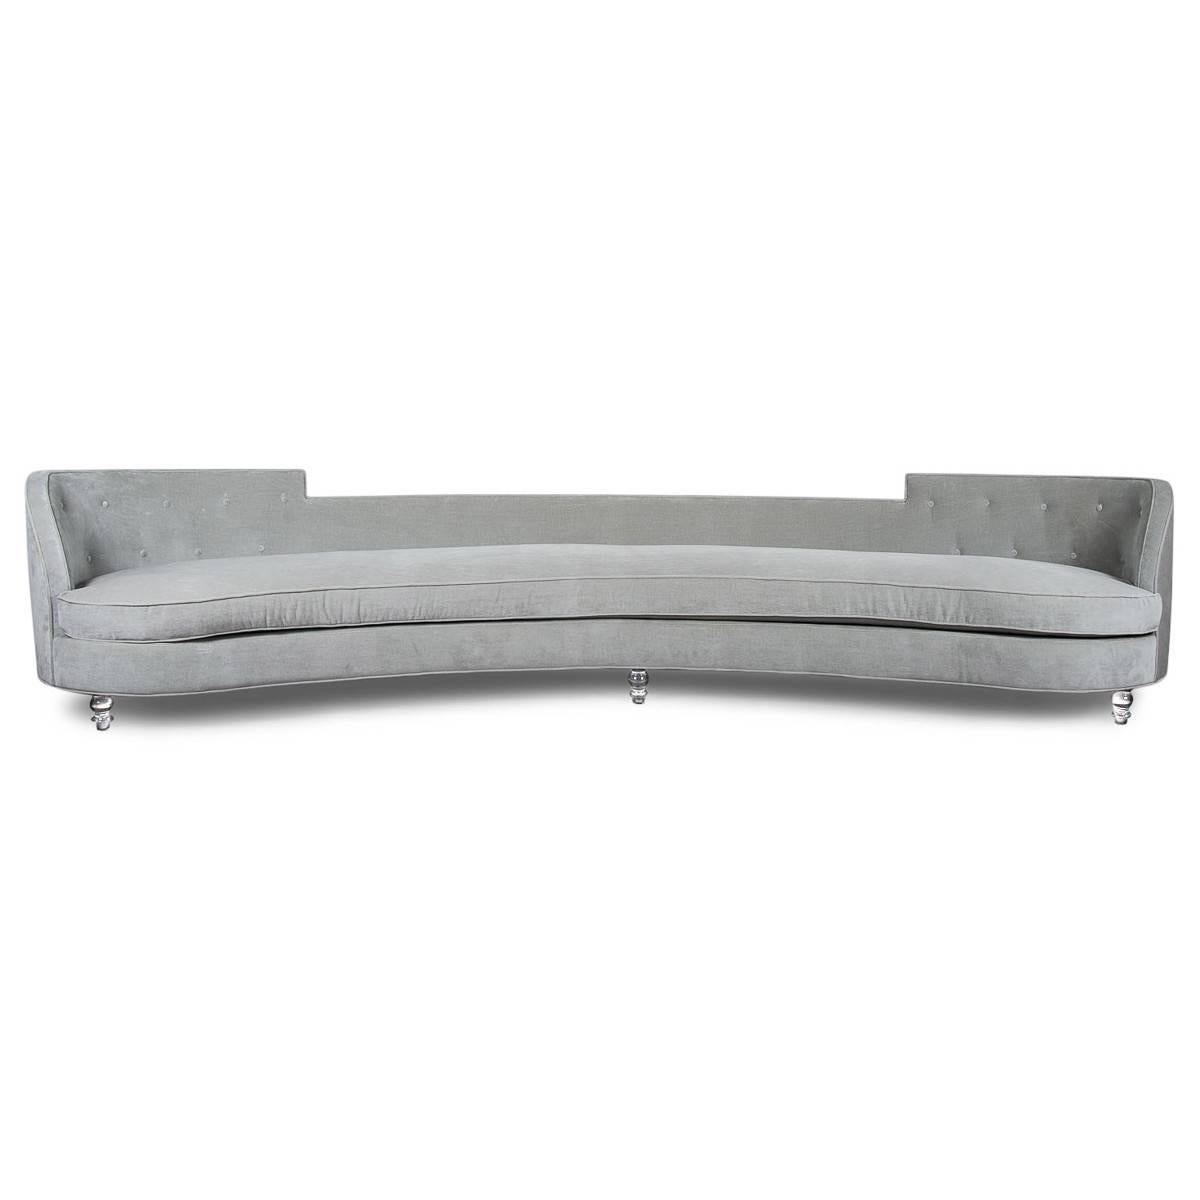 With Classic clean lines and smooth curves comes this curved sofa. Uniquely shaped; with 5